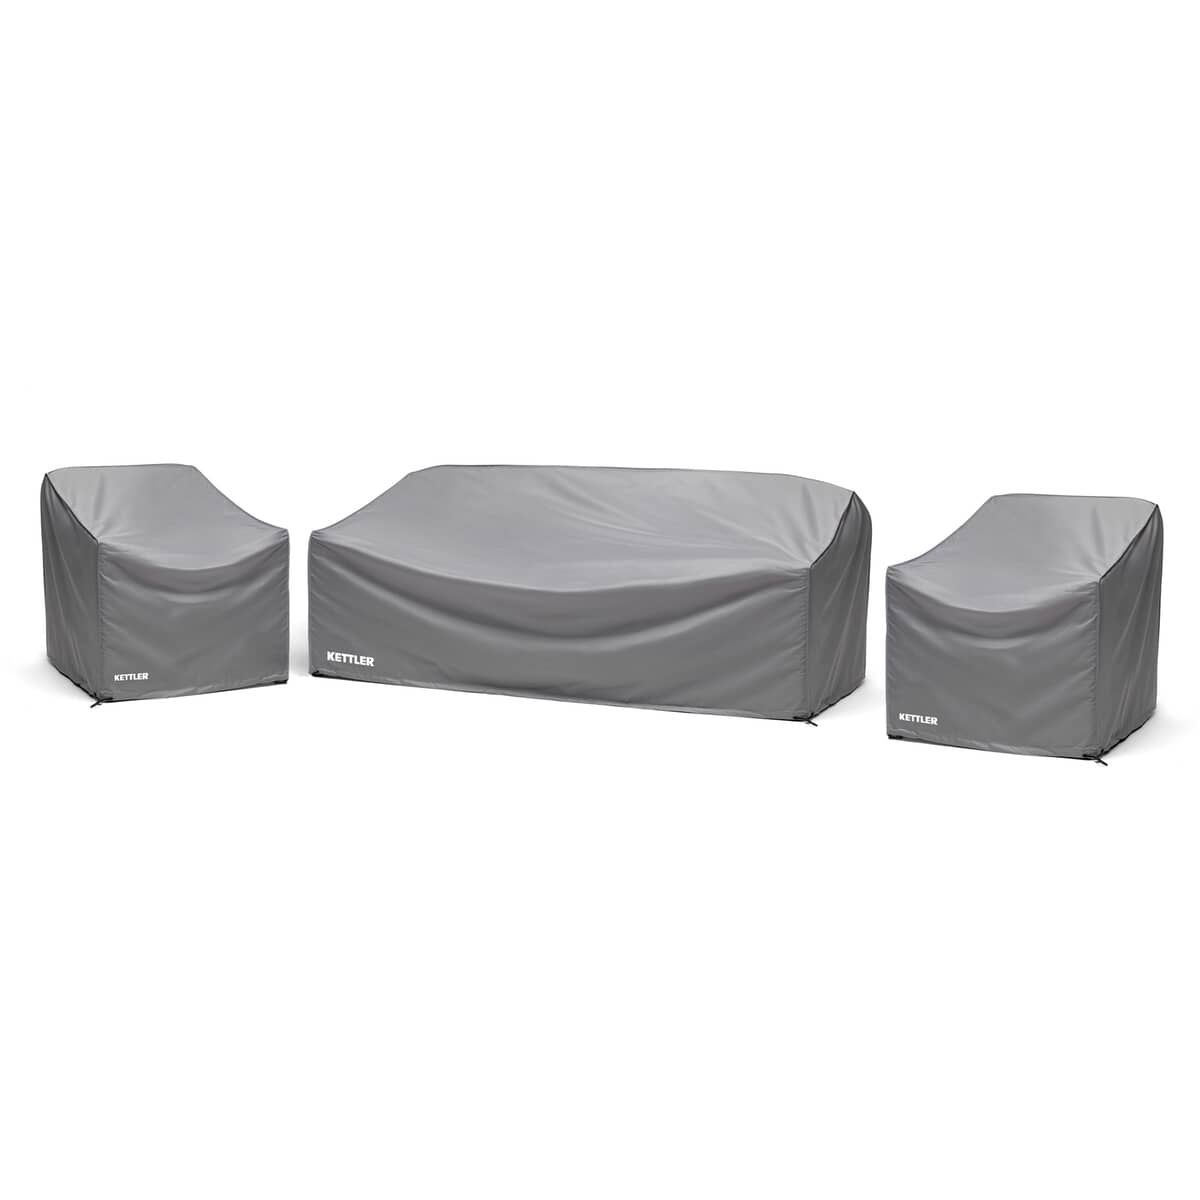 Kettler Protective Cover - Gio 5 Seater Lounge Set